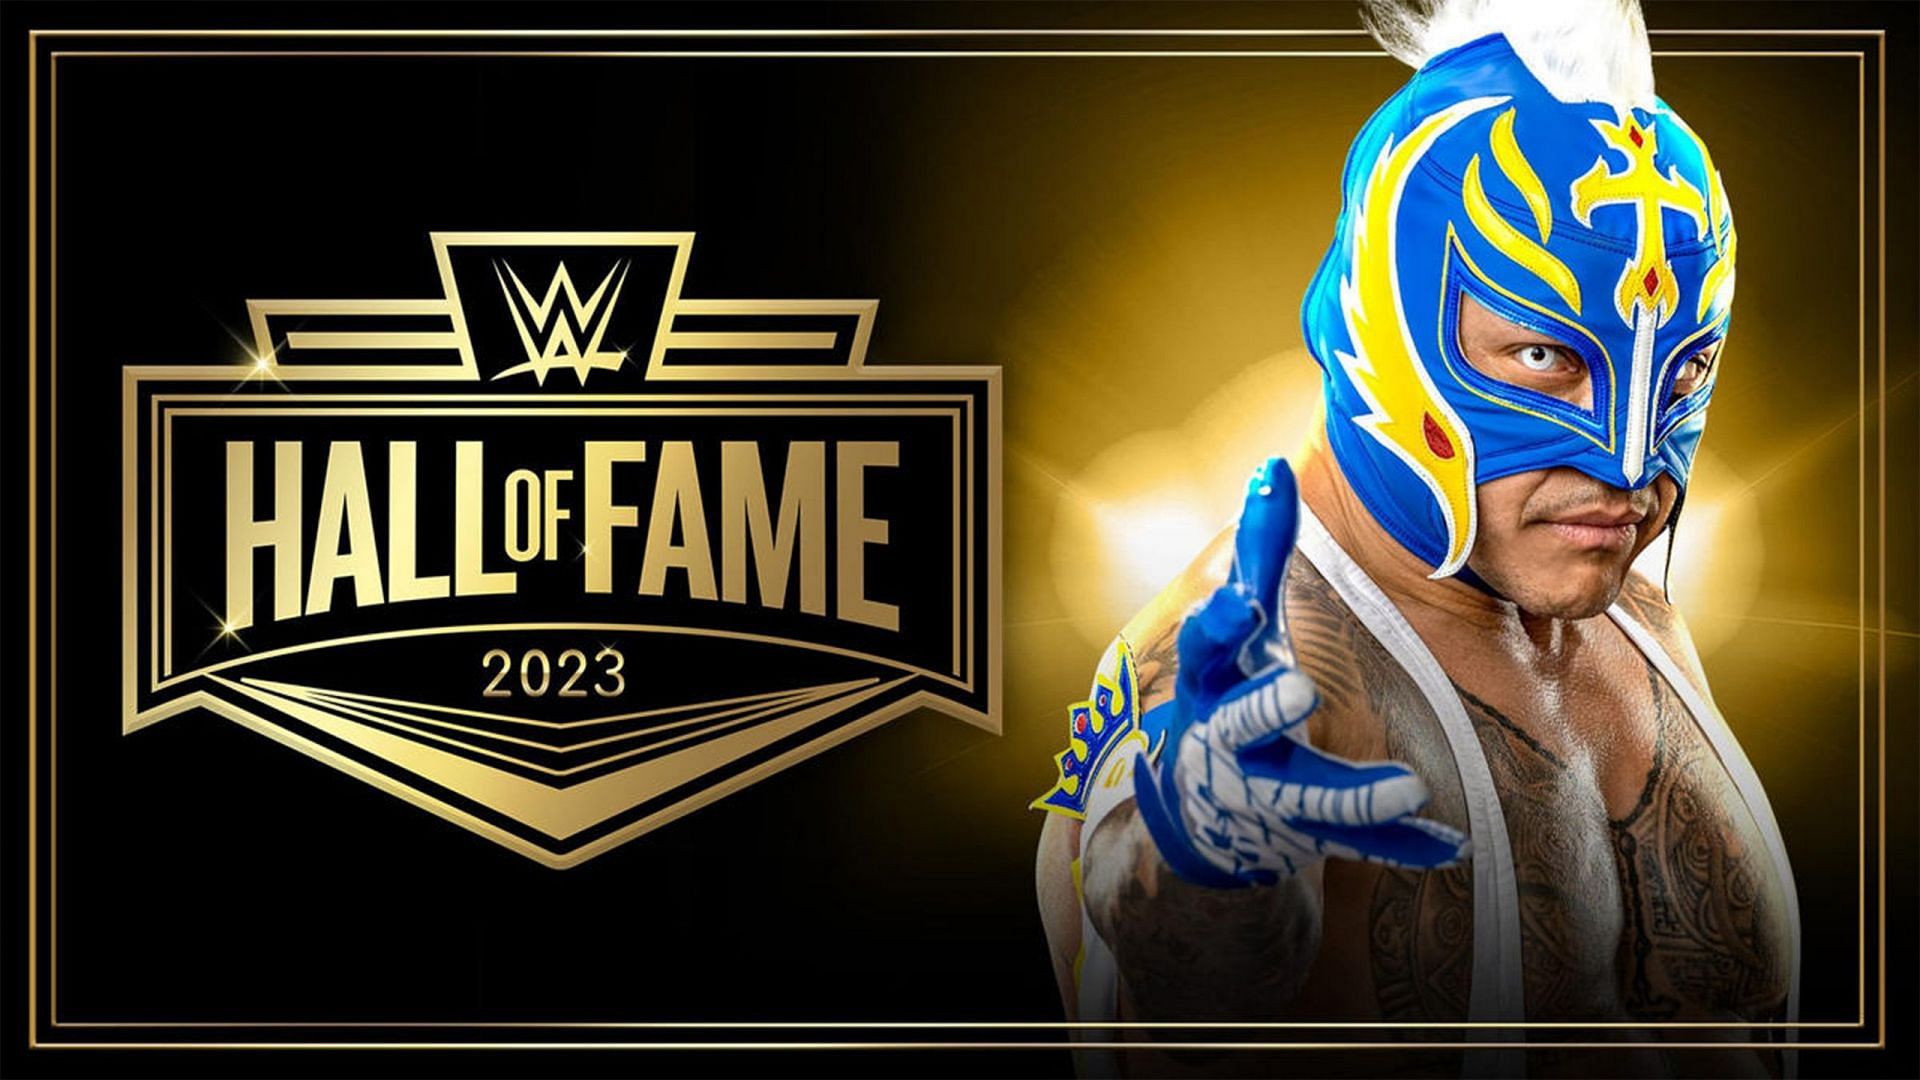 Rey Mysterio will be inducted into WWE Hall of Fame 2023